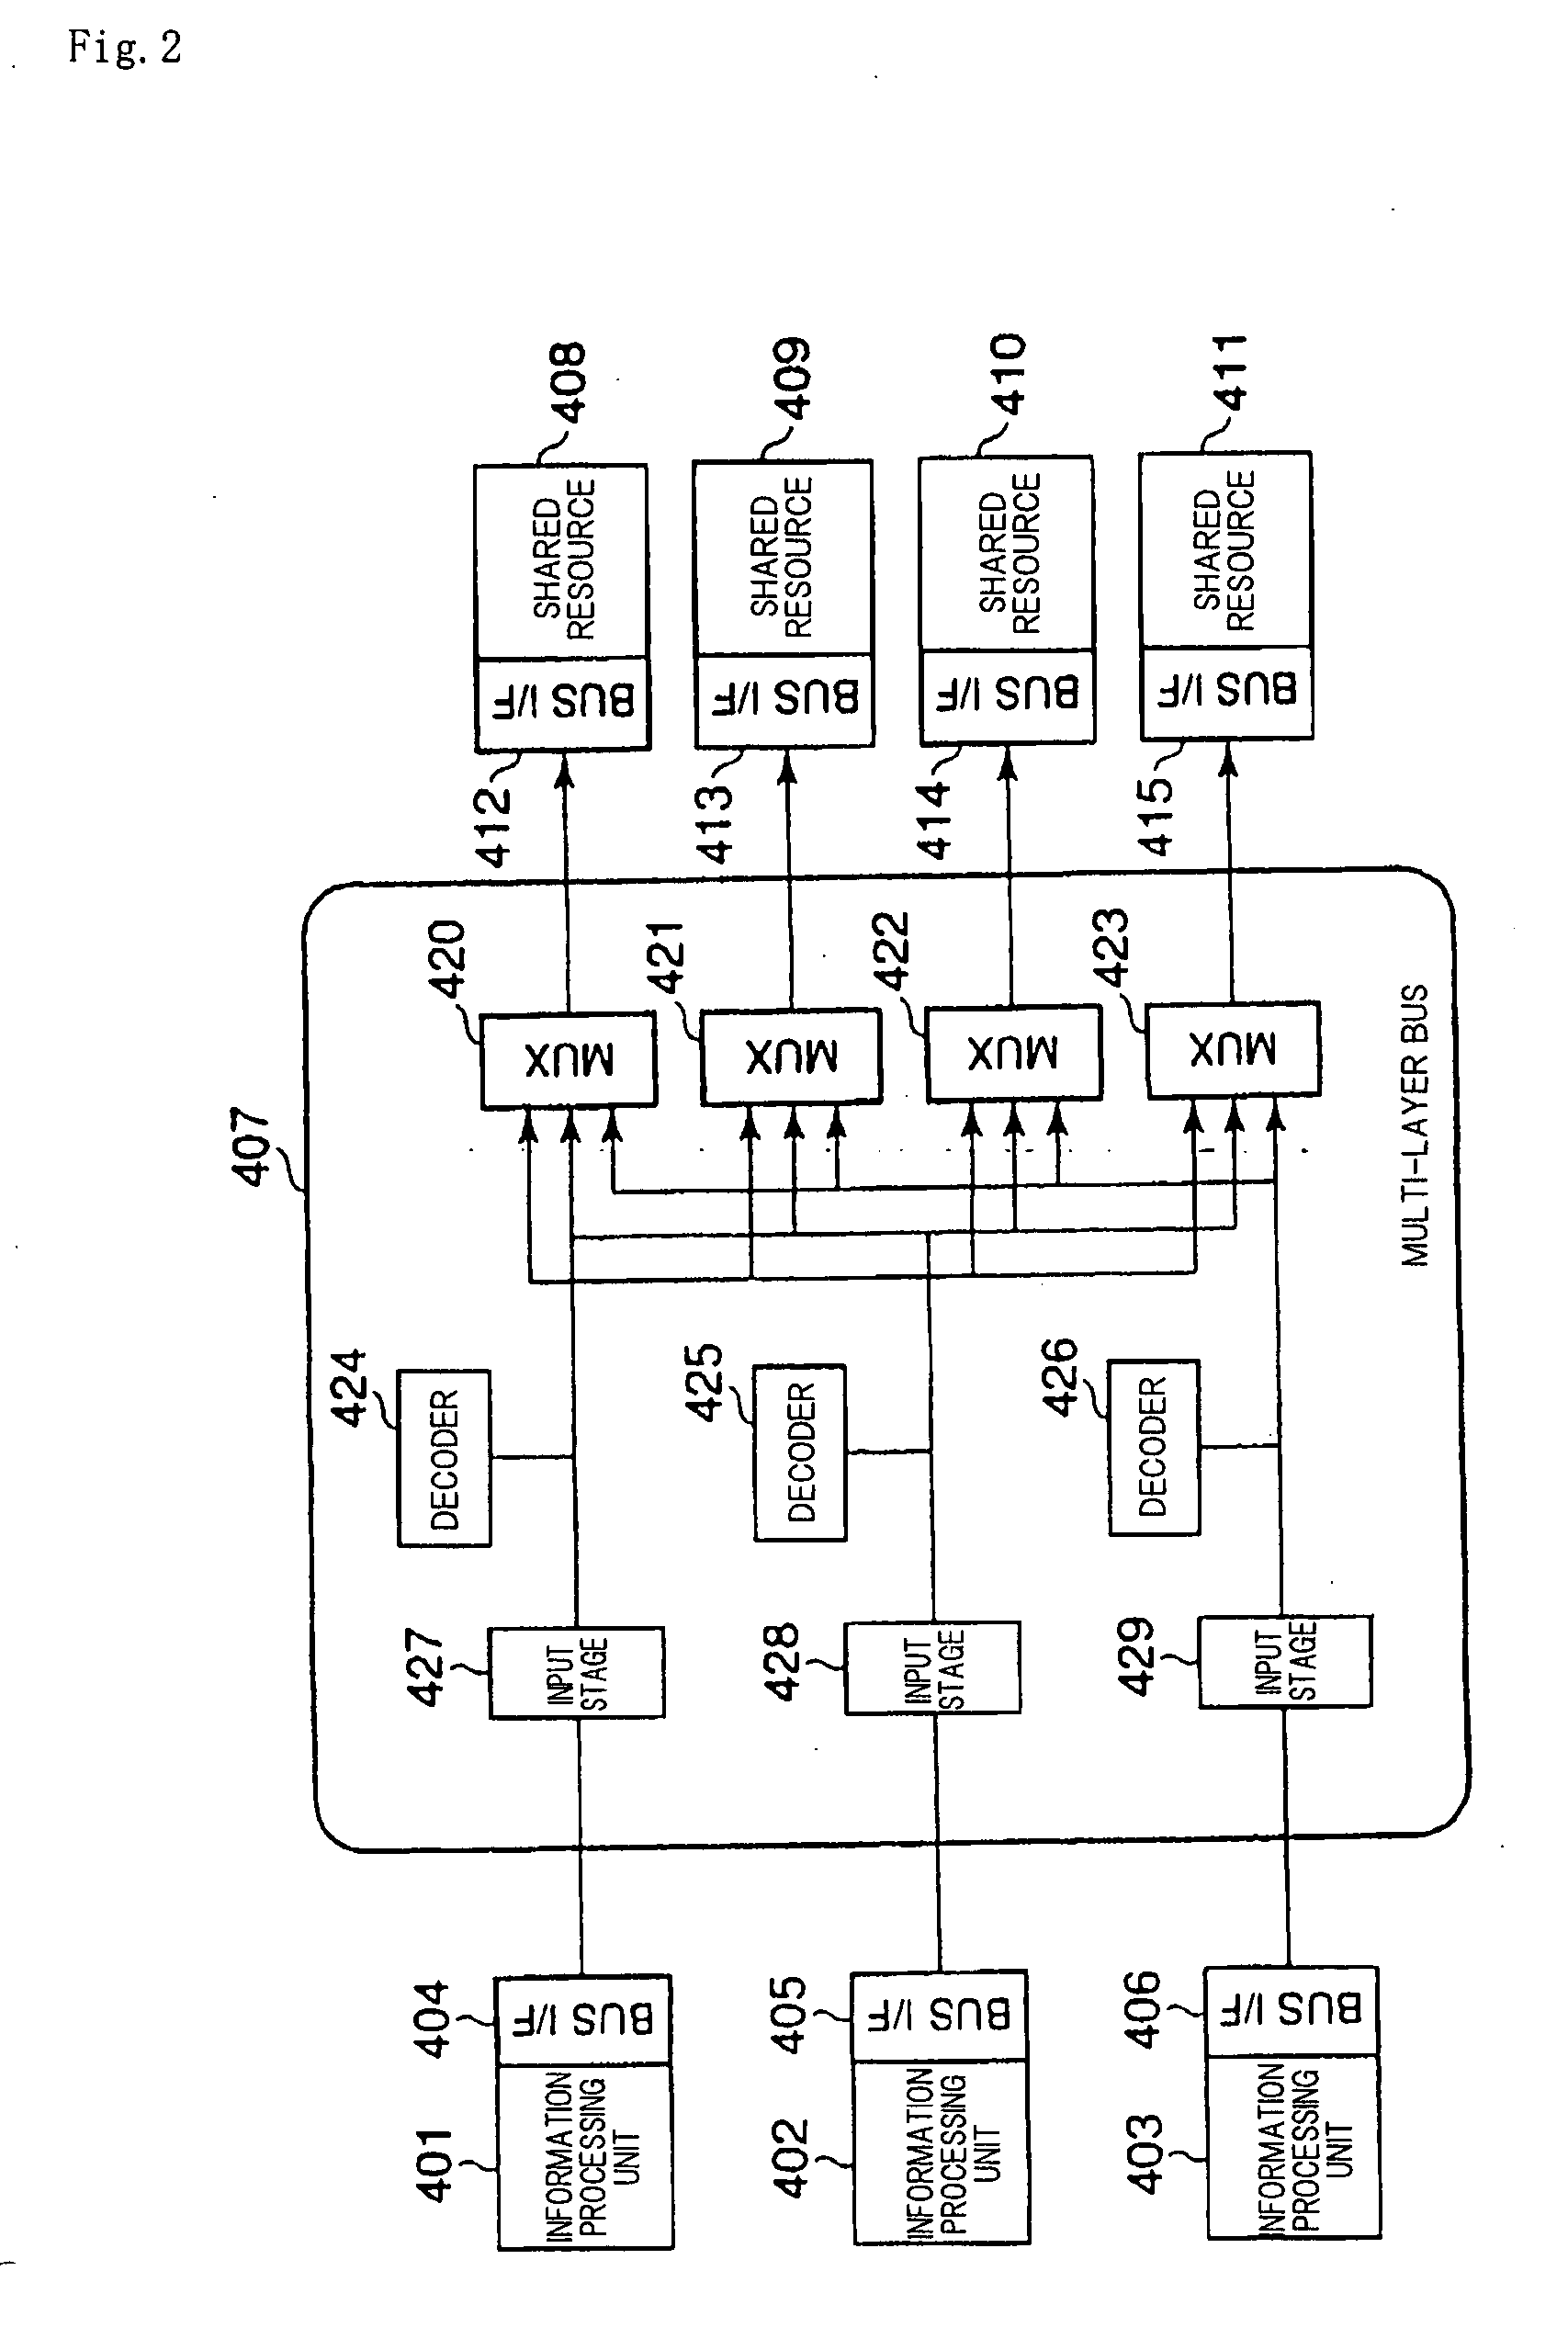 Information Processing Apparatus Having Multiple Processing Units Sharing Multiple Resources